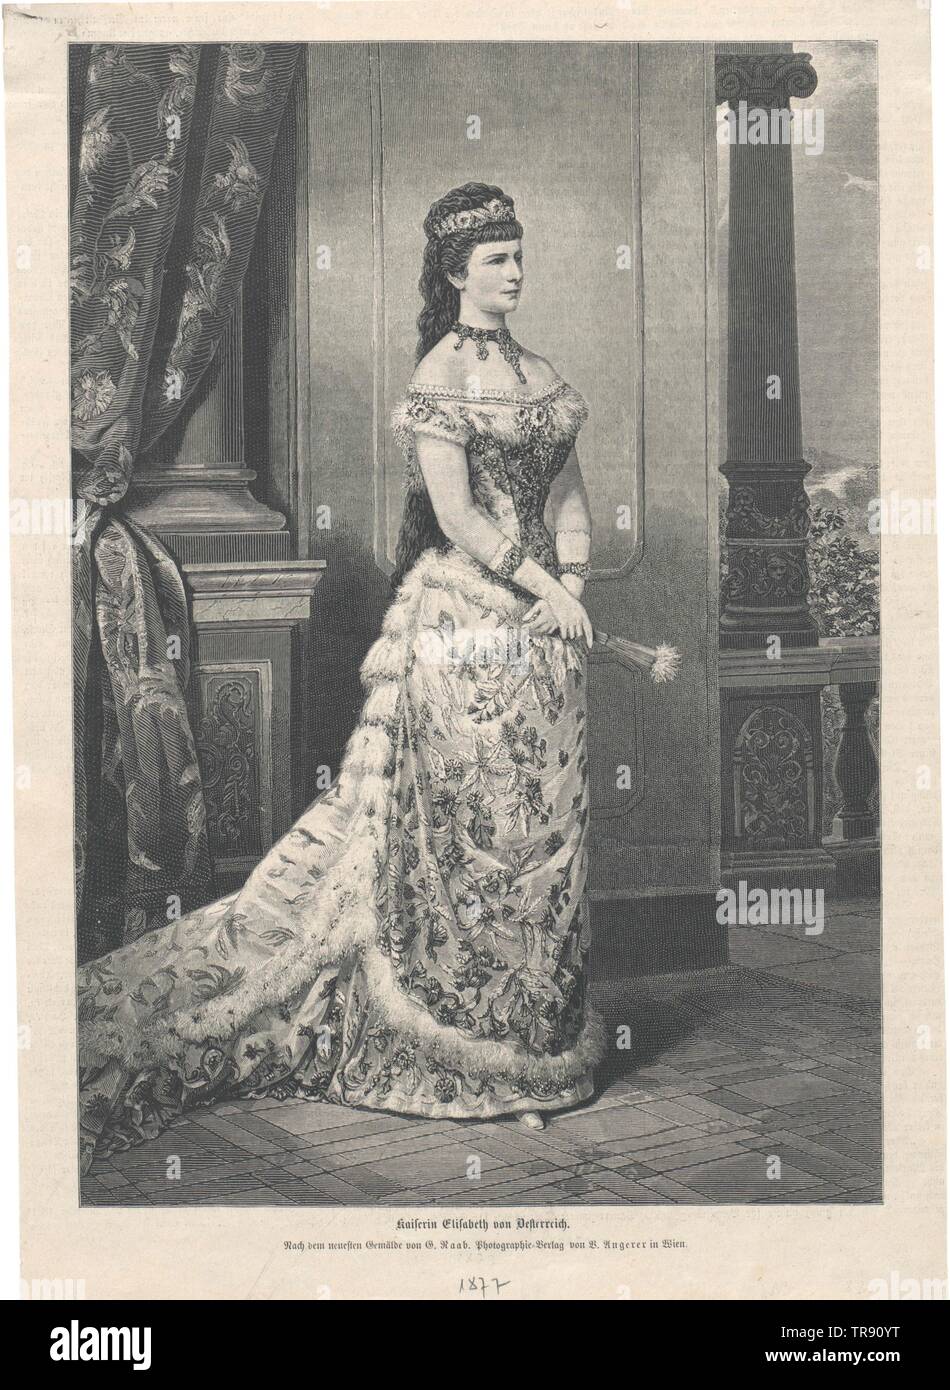 Elisabeth, Empress of Austria, printed facsimile based on painting by Georg Raab, 1878, from cause of the silver wedding (1879), , Additional-Rights-Clearance-Info-Not-Available Stock Photo